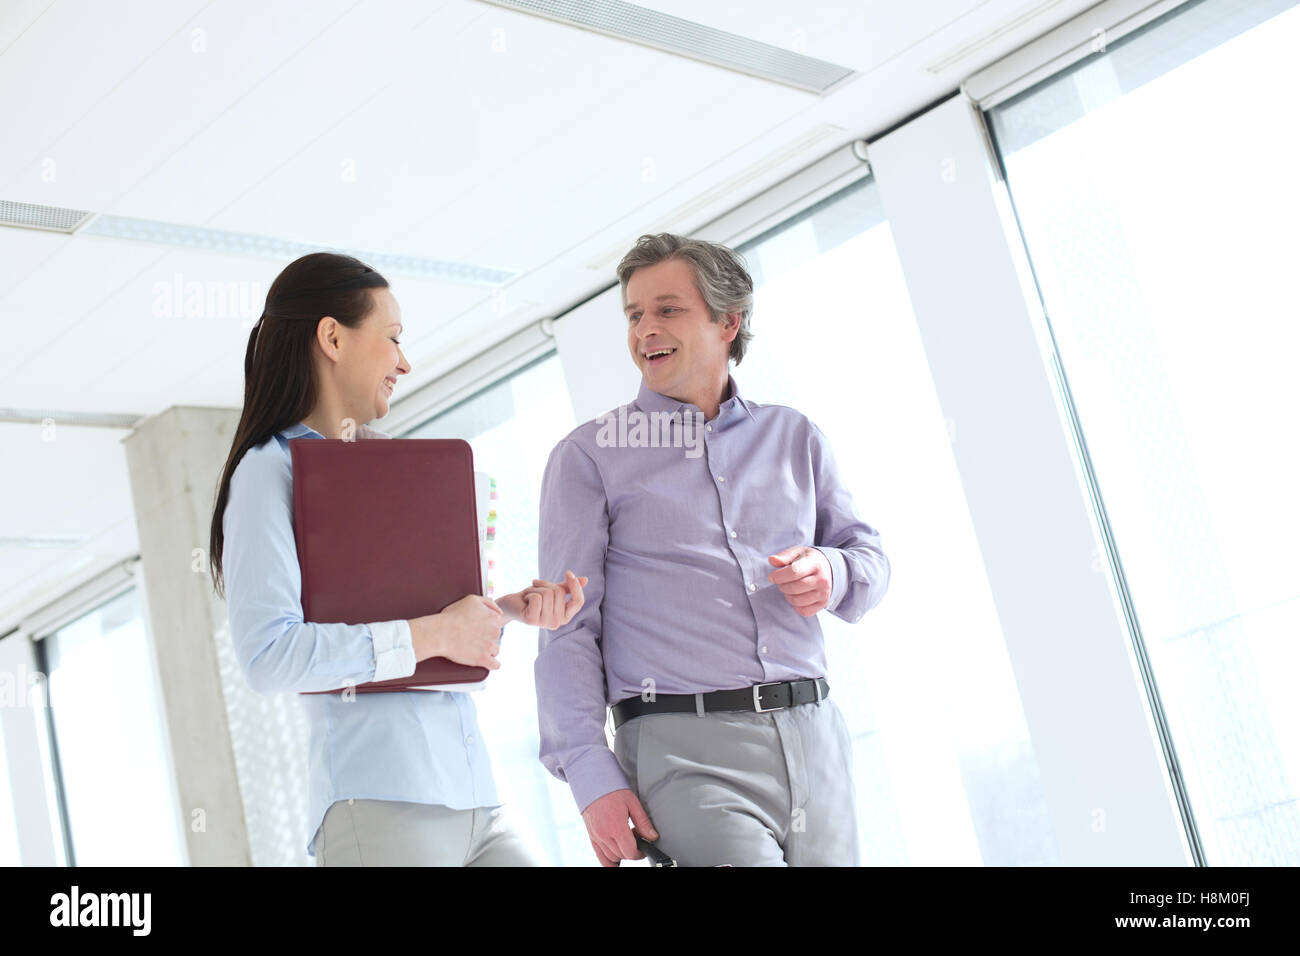 Smiling businessman talking with female colleague in office Banque D'Images